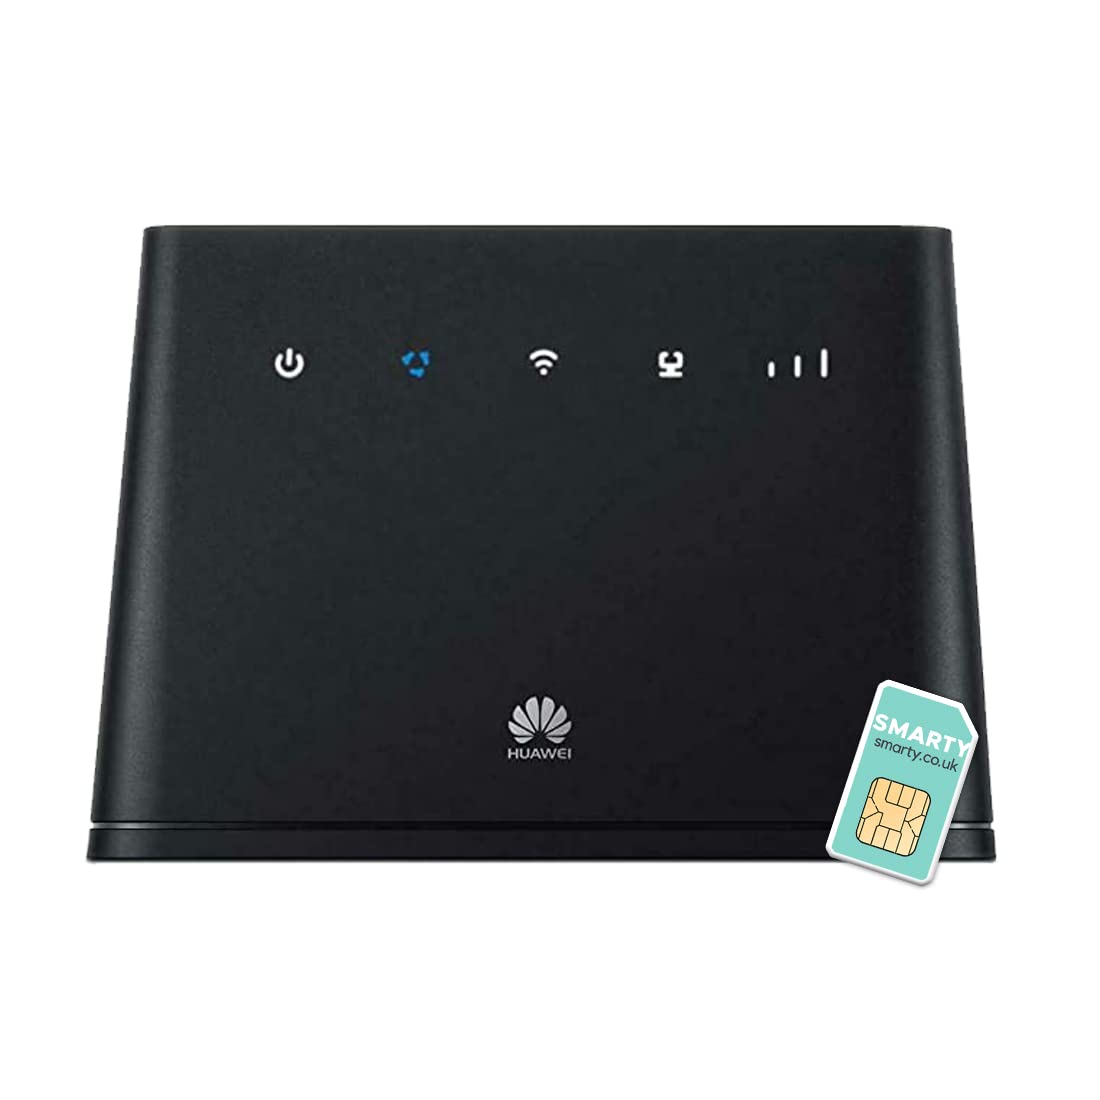 Huawei B311 2020-4G/ LTE 150 Mbps Mobile Wi-Fi Router, Unlocked to All Networks- Genuine UK Warranty stock with FREE SMARTY SIM Card- Black